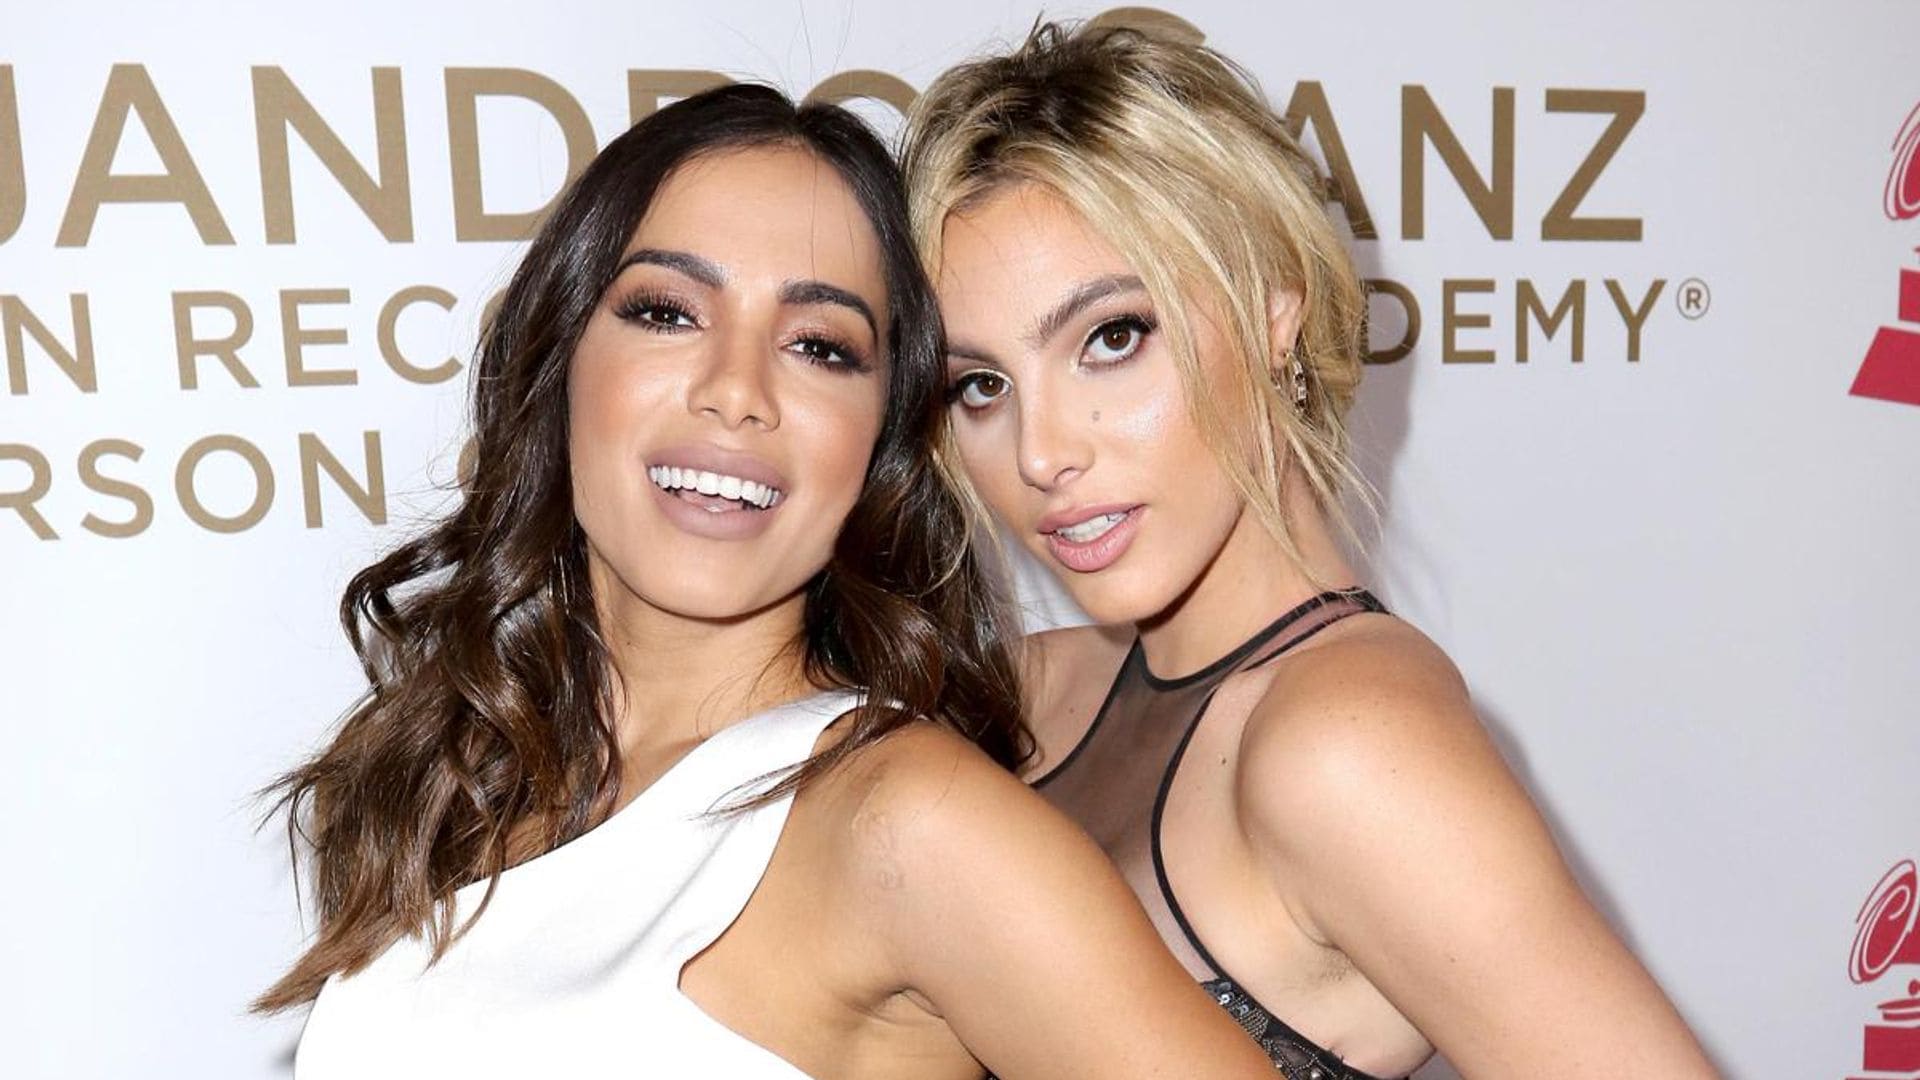 Lele Pons and Anitta defy Aspen’s freezy temperatures while skiing wrapped in towels